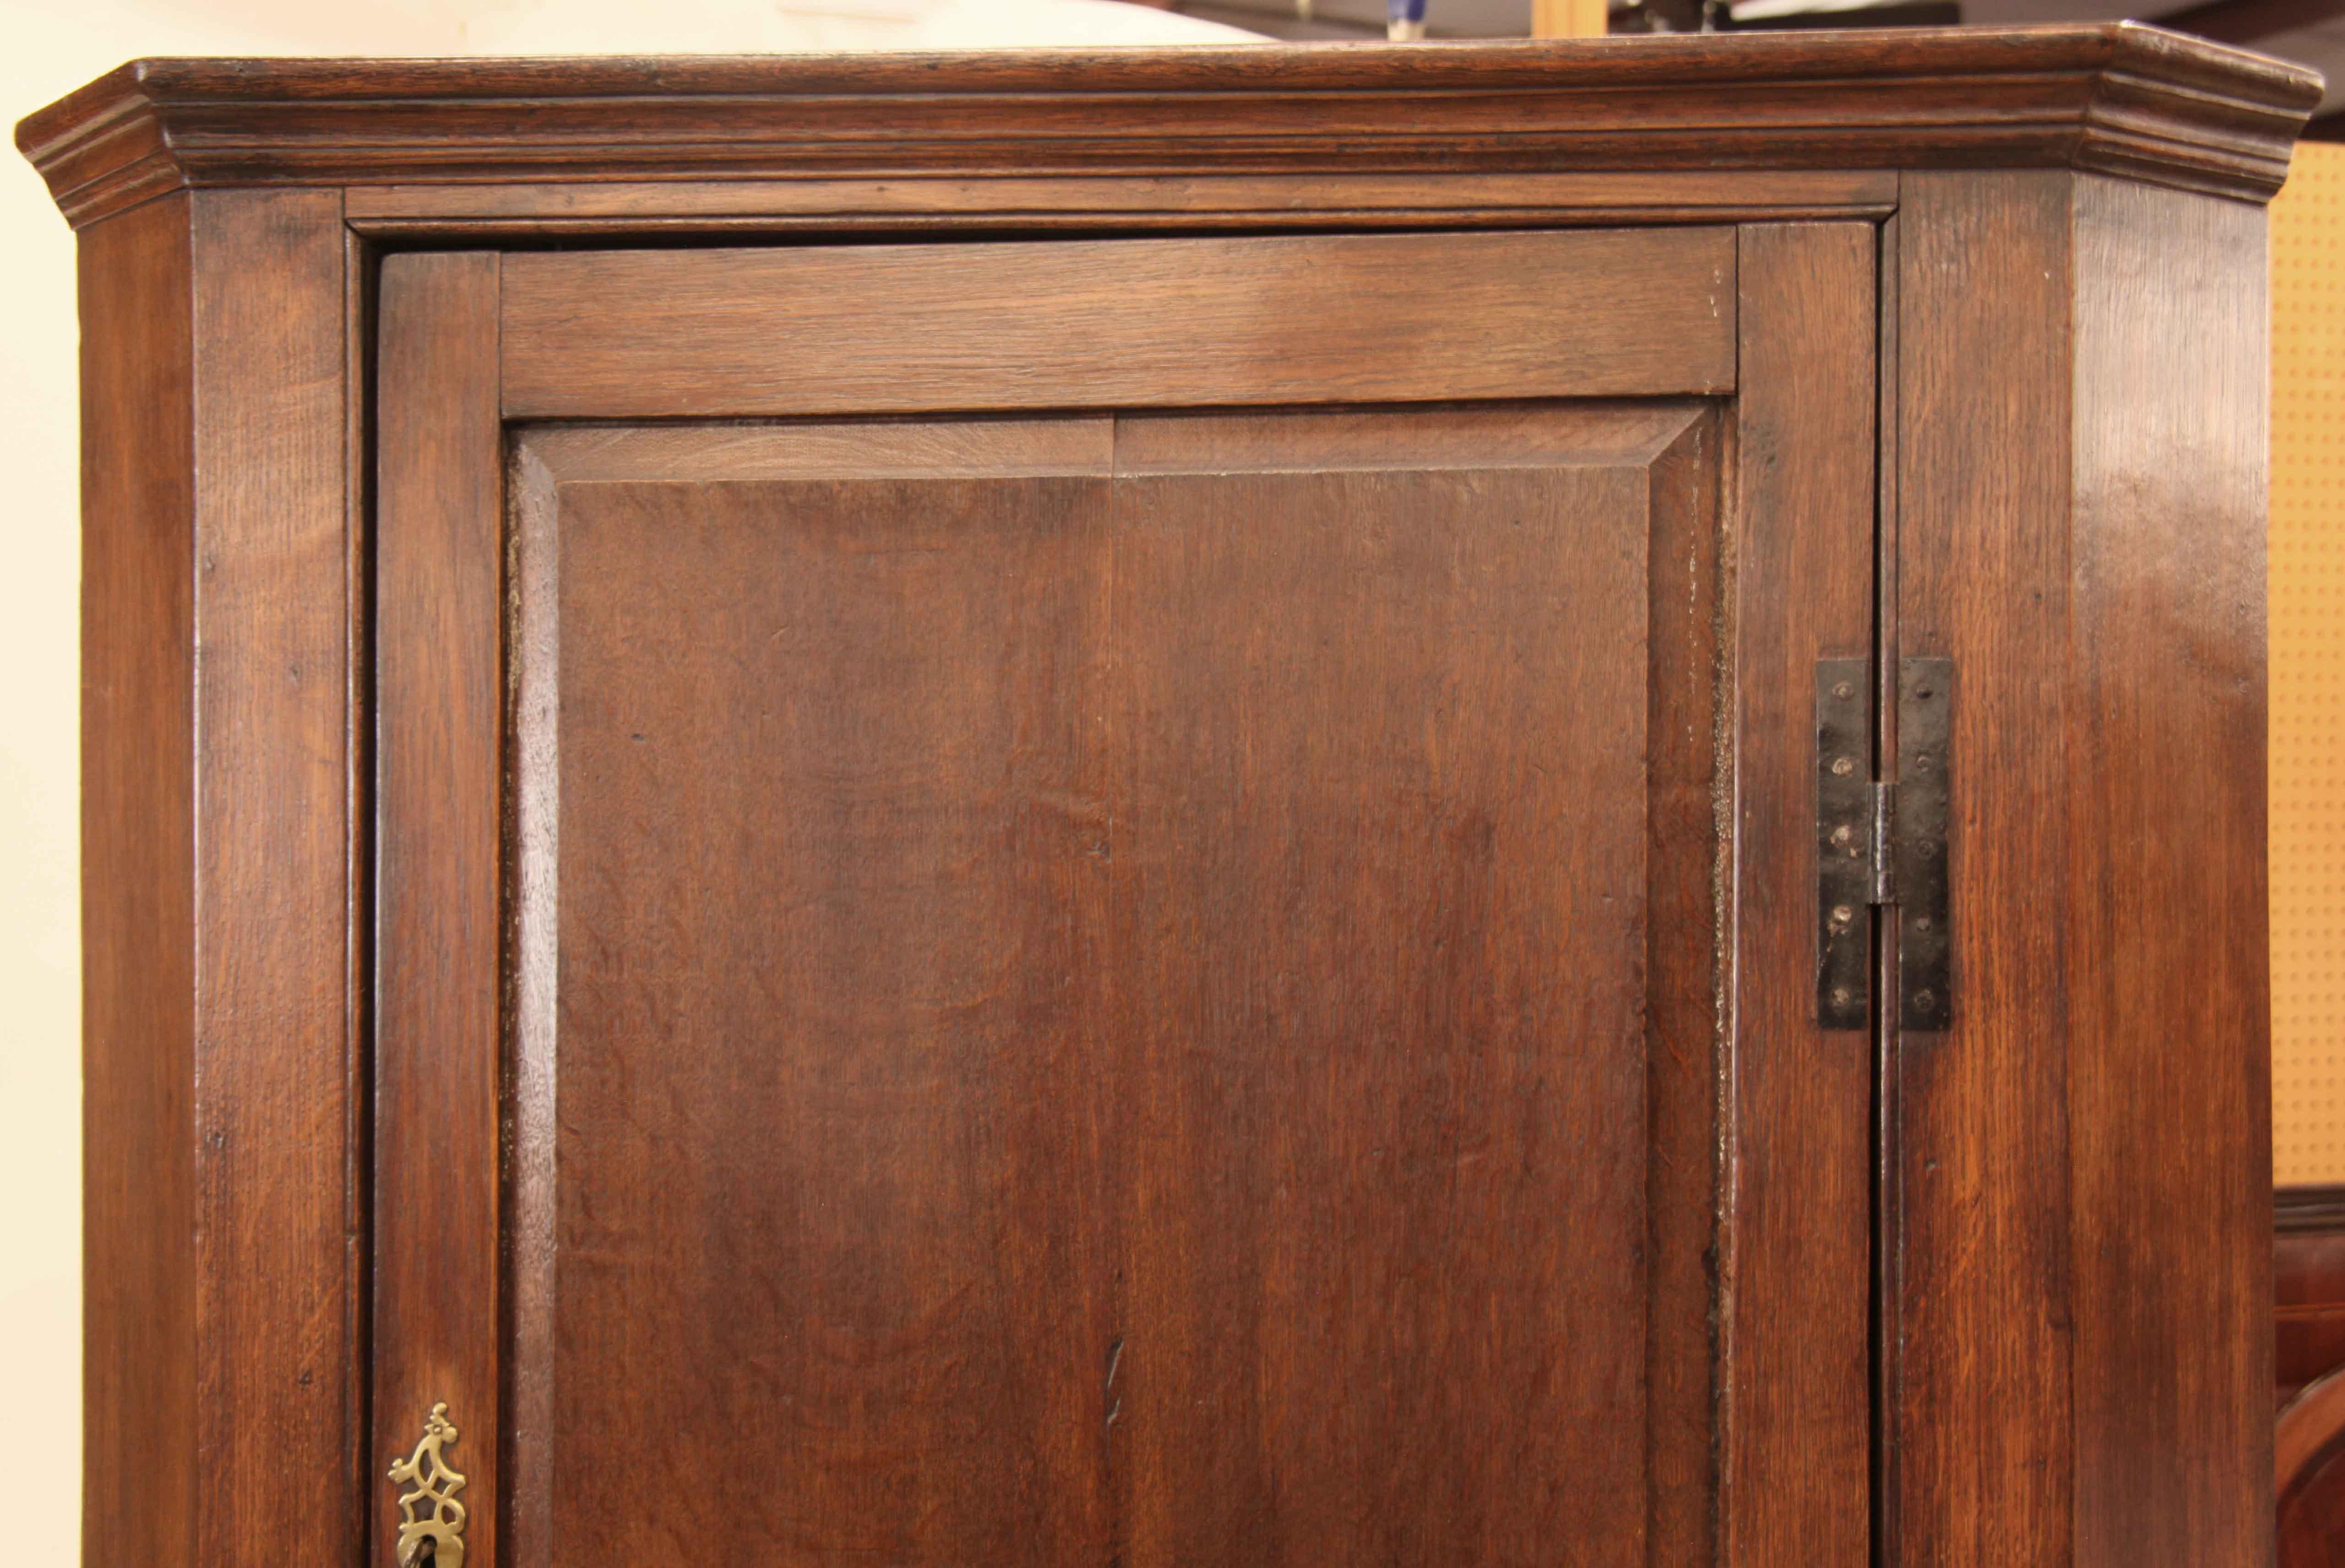 English oak corner cupboard, the cove cornice above large raised panel door (and smaller door below) with steel ''H'' hinges, reticulated brass escutcheons; both doors with working locks and keys. Upper and lower interiors with shelves and  grain